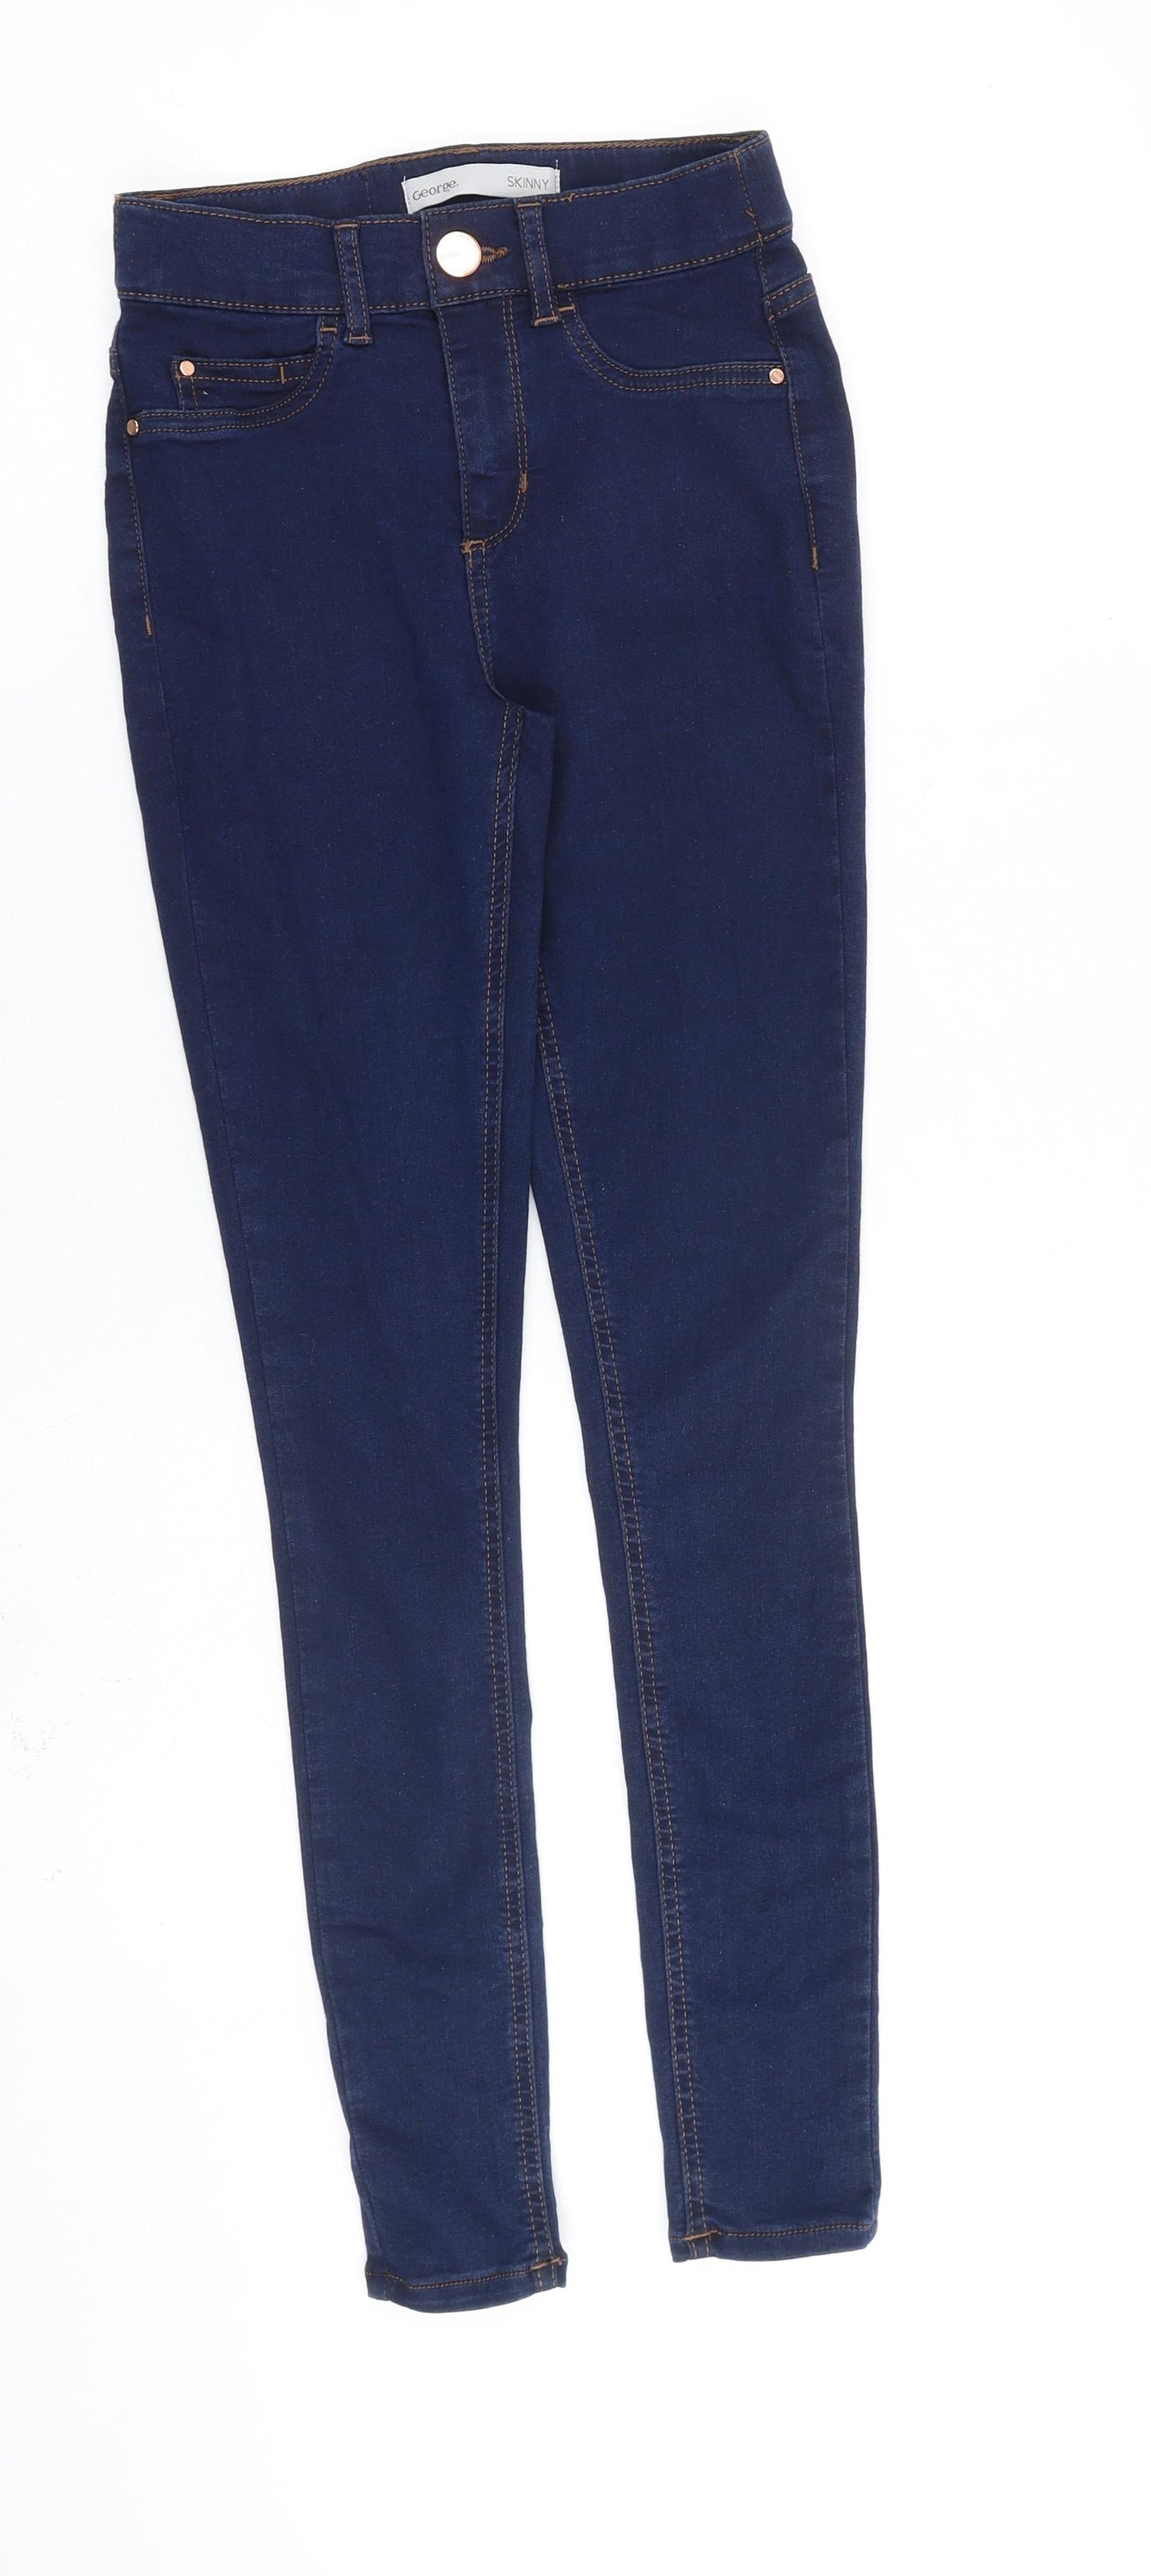 George Womens Blue Cotton Skinny Jeans Size 6 L28 in Slim Zip